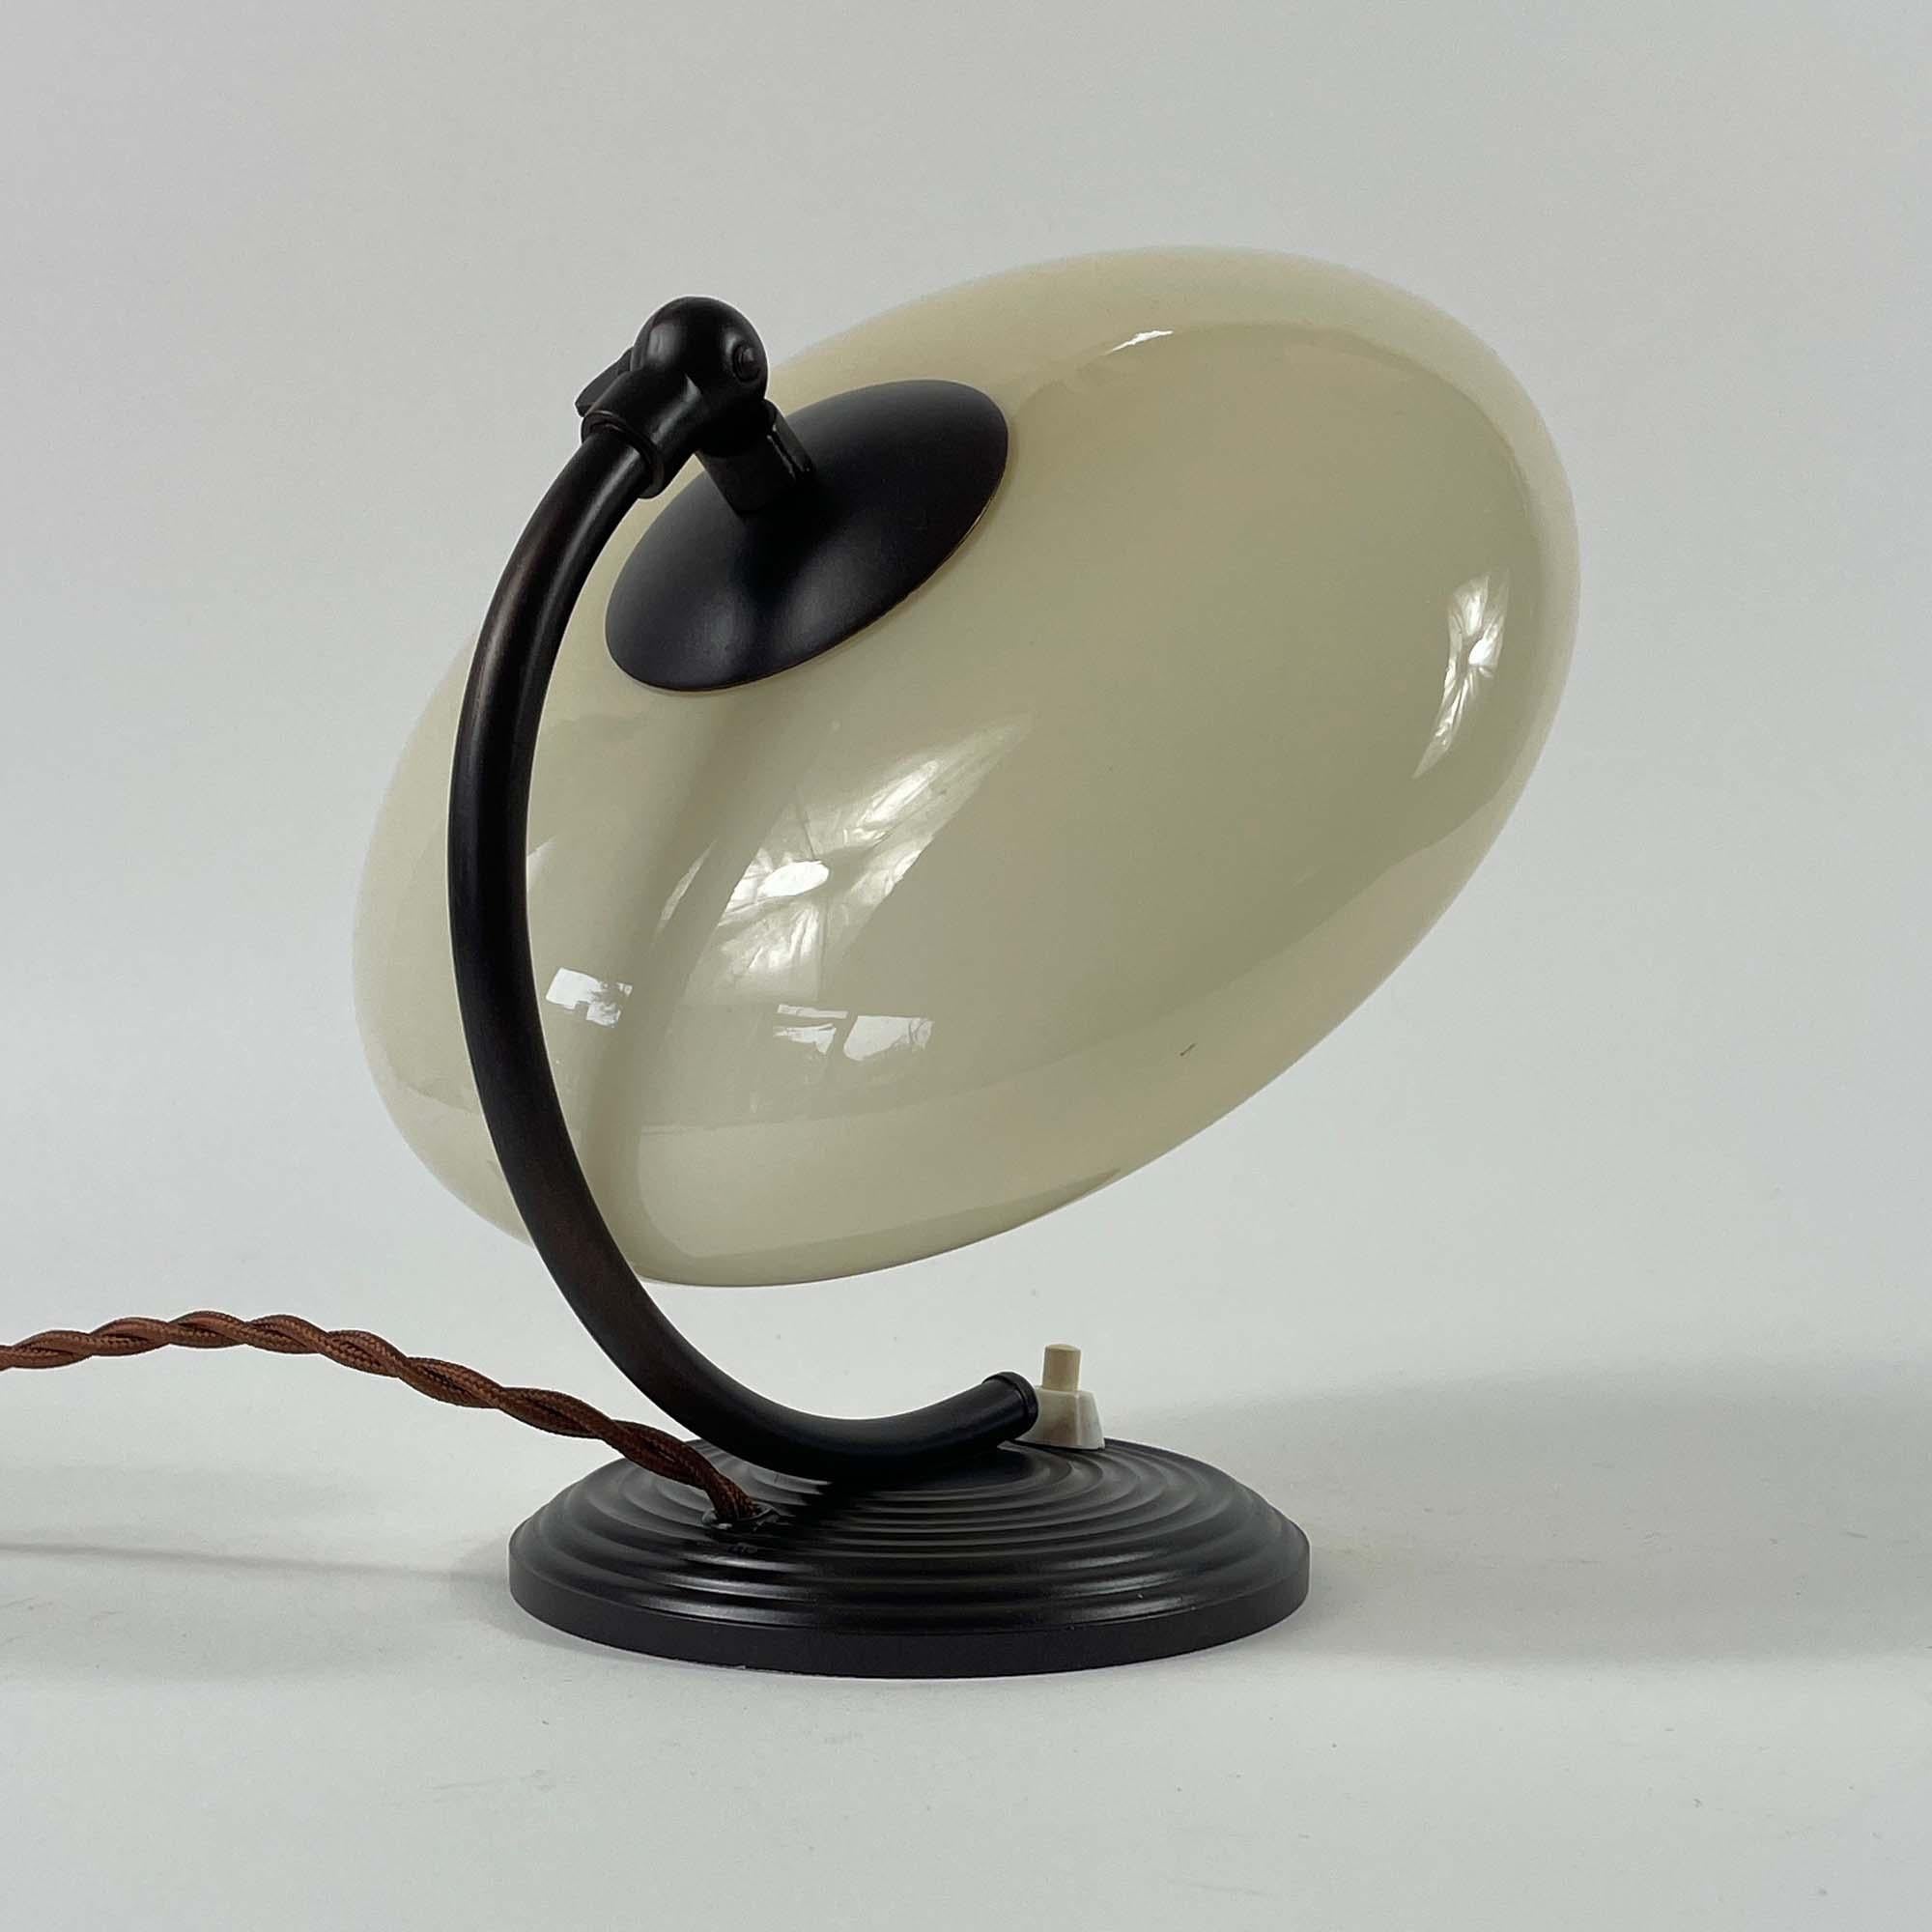 This Art Deco table lamp or bedside lamp was designed and manufactured in Germany during the Bauhaus Period in the 1920s to 1930s.

It features a cream / sand colored opaline glass UFO shaped lampshade and bronzed / burnished metal hardware.

The